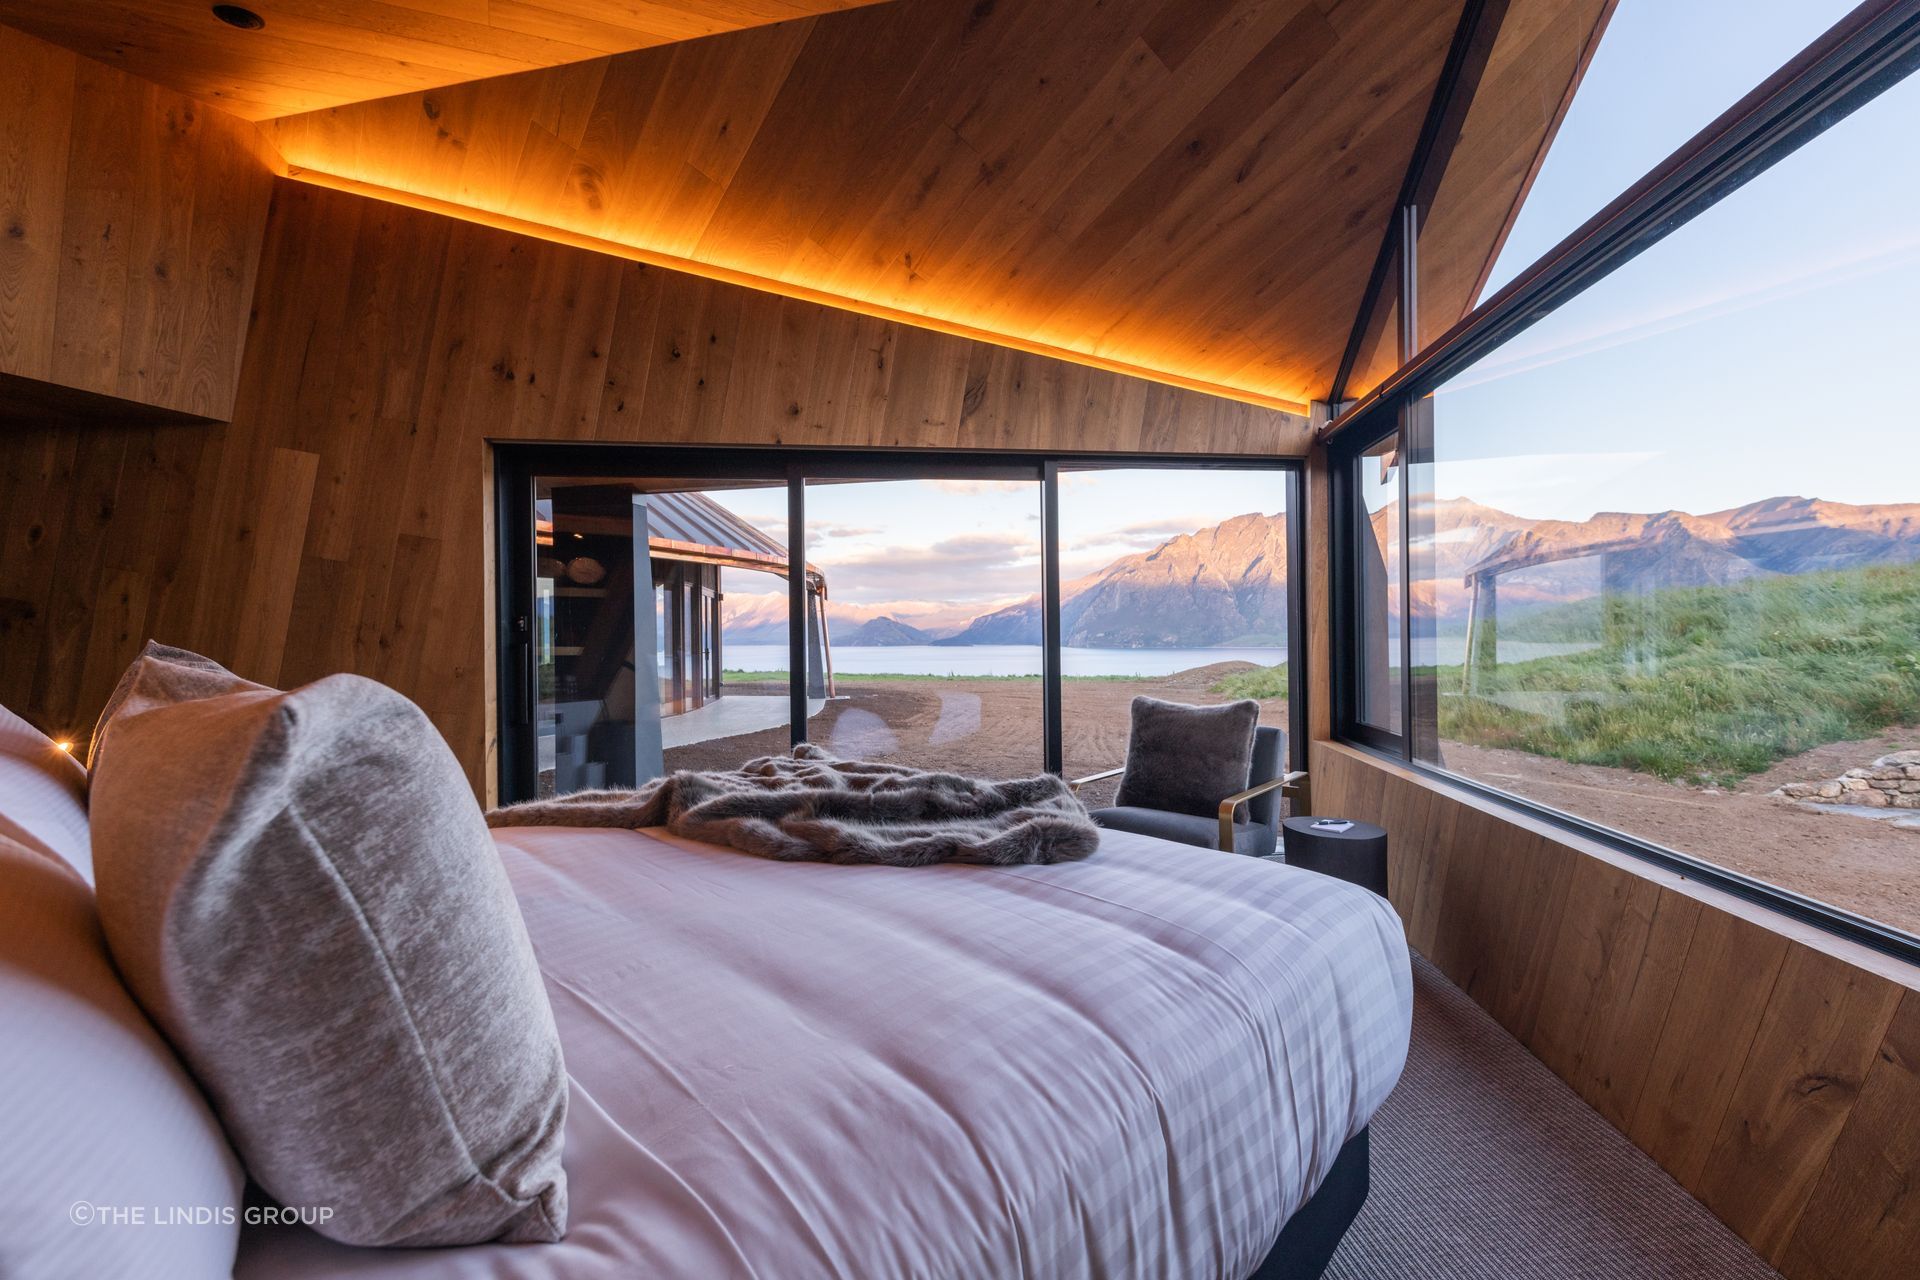 The bedrooms have been positioned for optimal views.